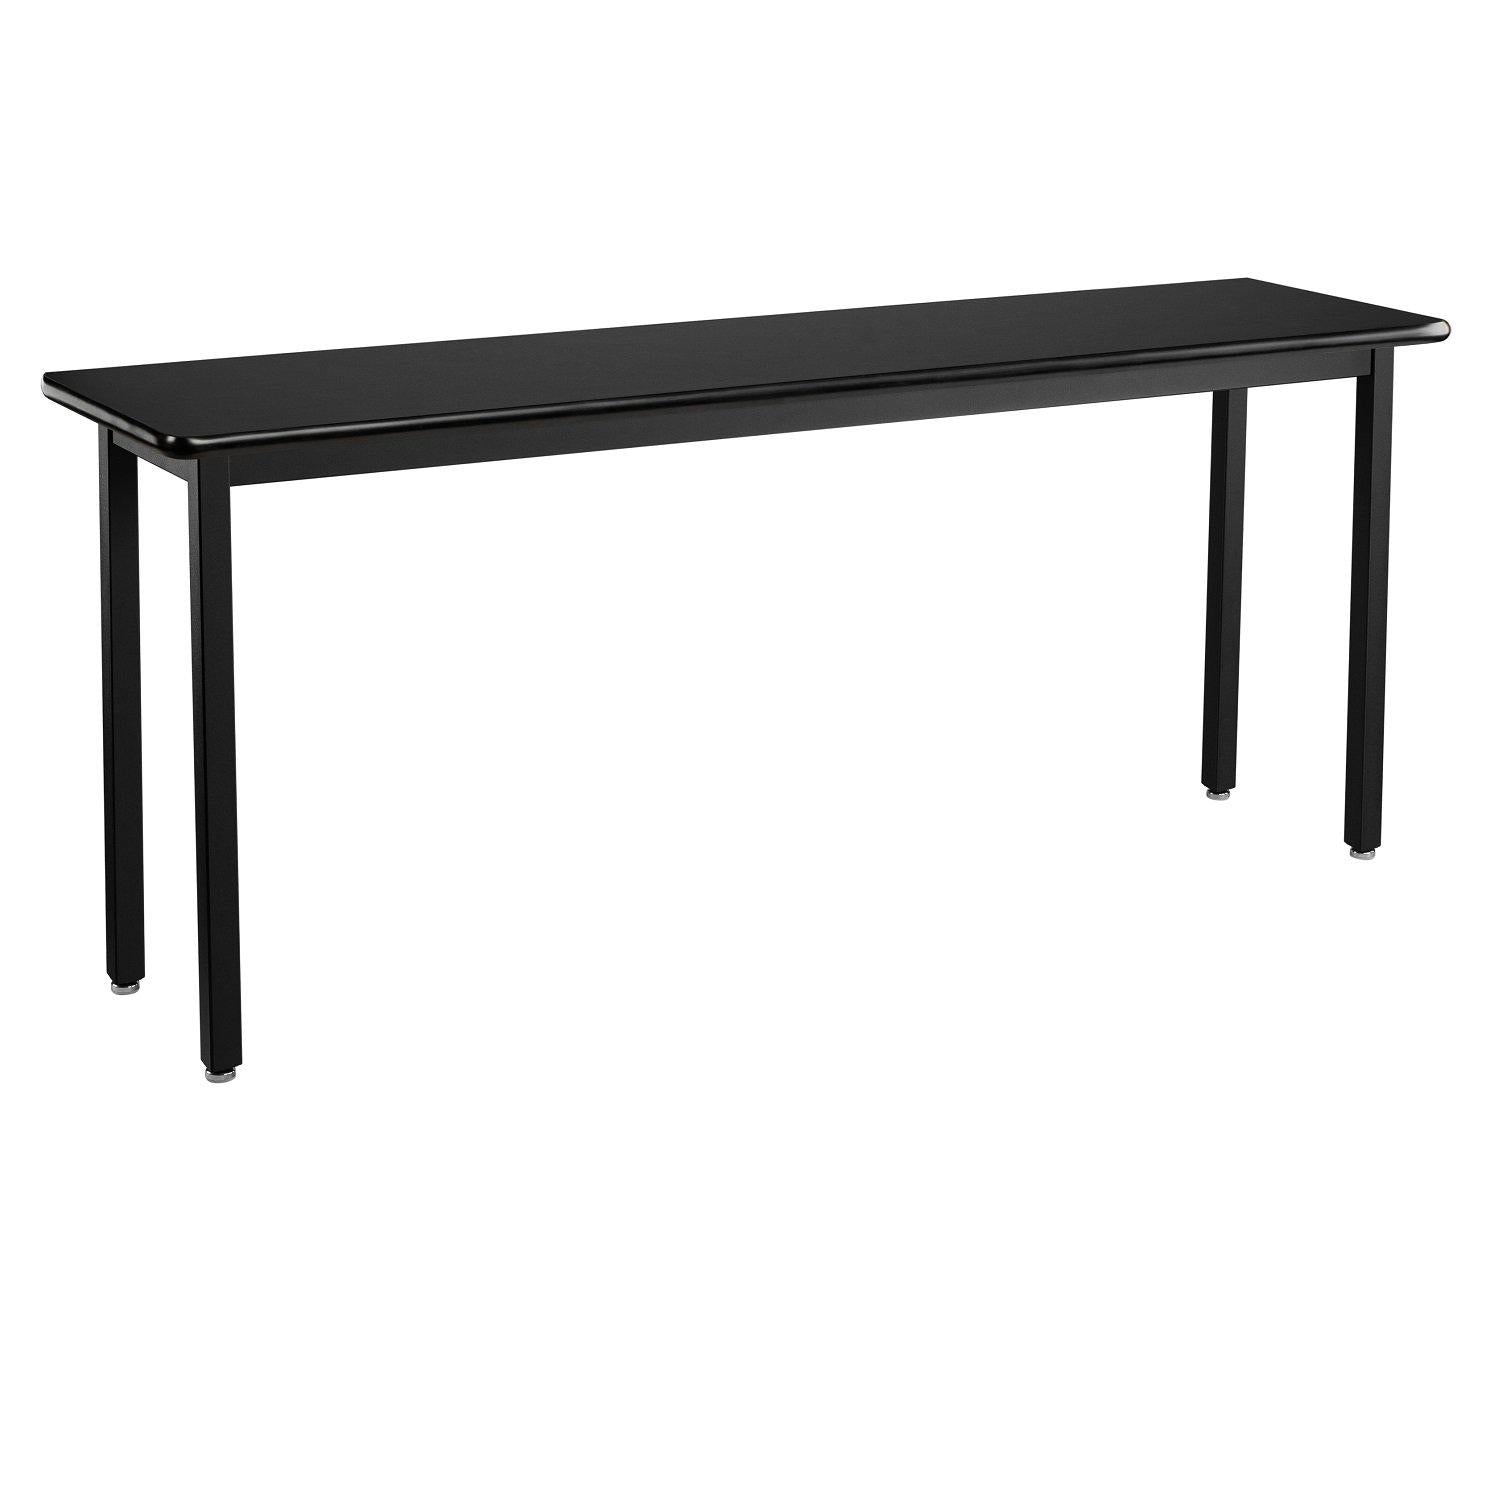 Heavy-Duty Fixed Height Utility Table, Black Frame, 18" x 96", High-Pressure Laminate Top with T-Mold Edge